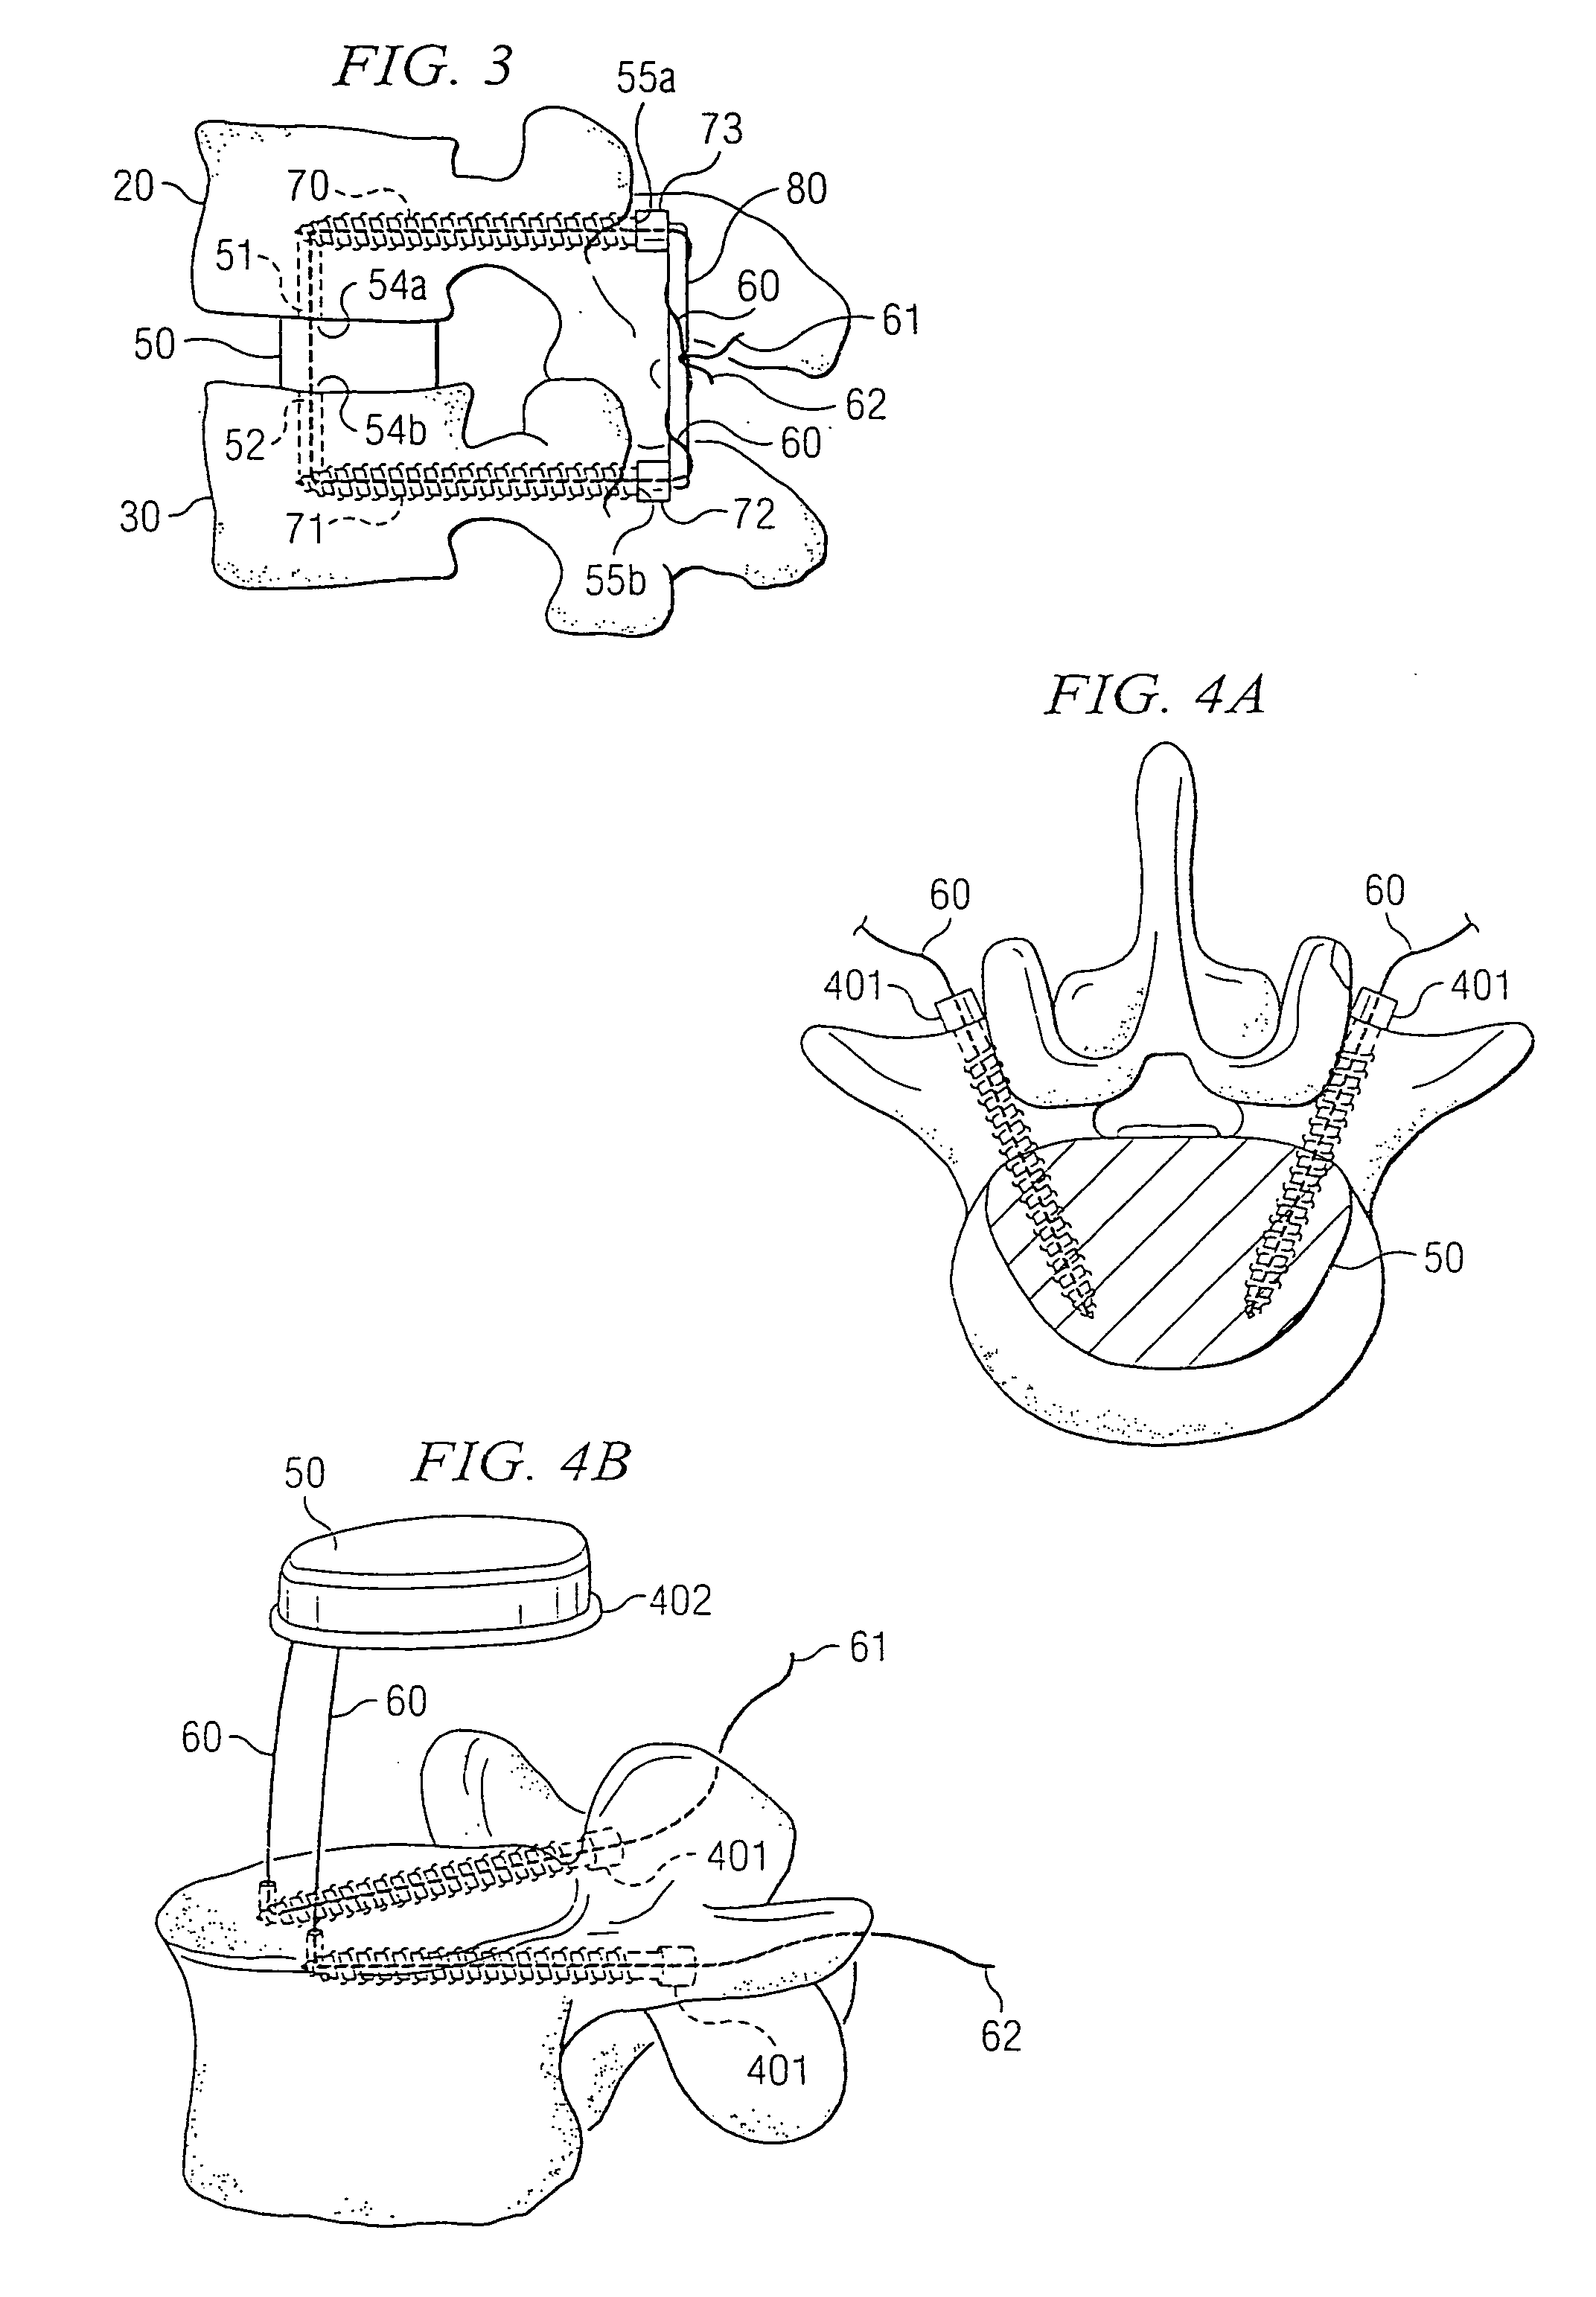 Nucleus replacement securing device and method